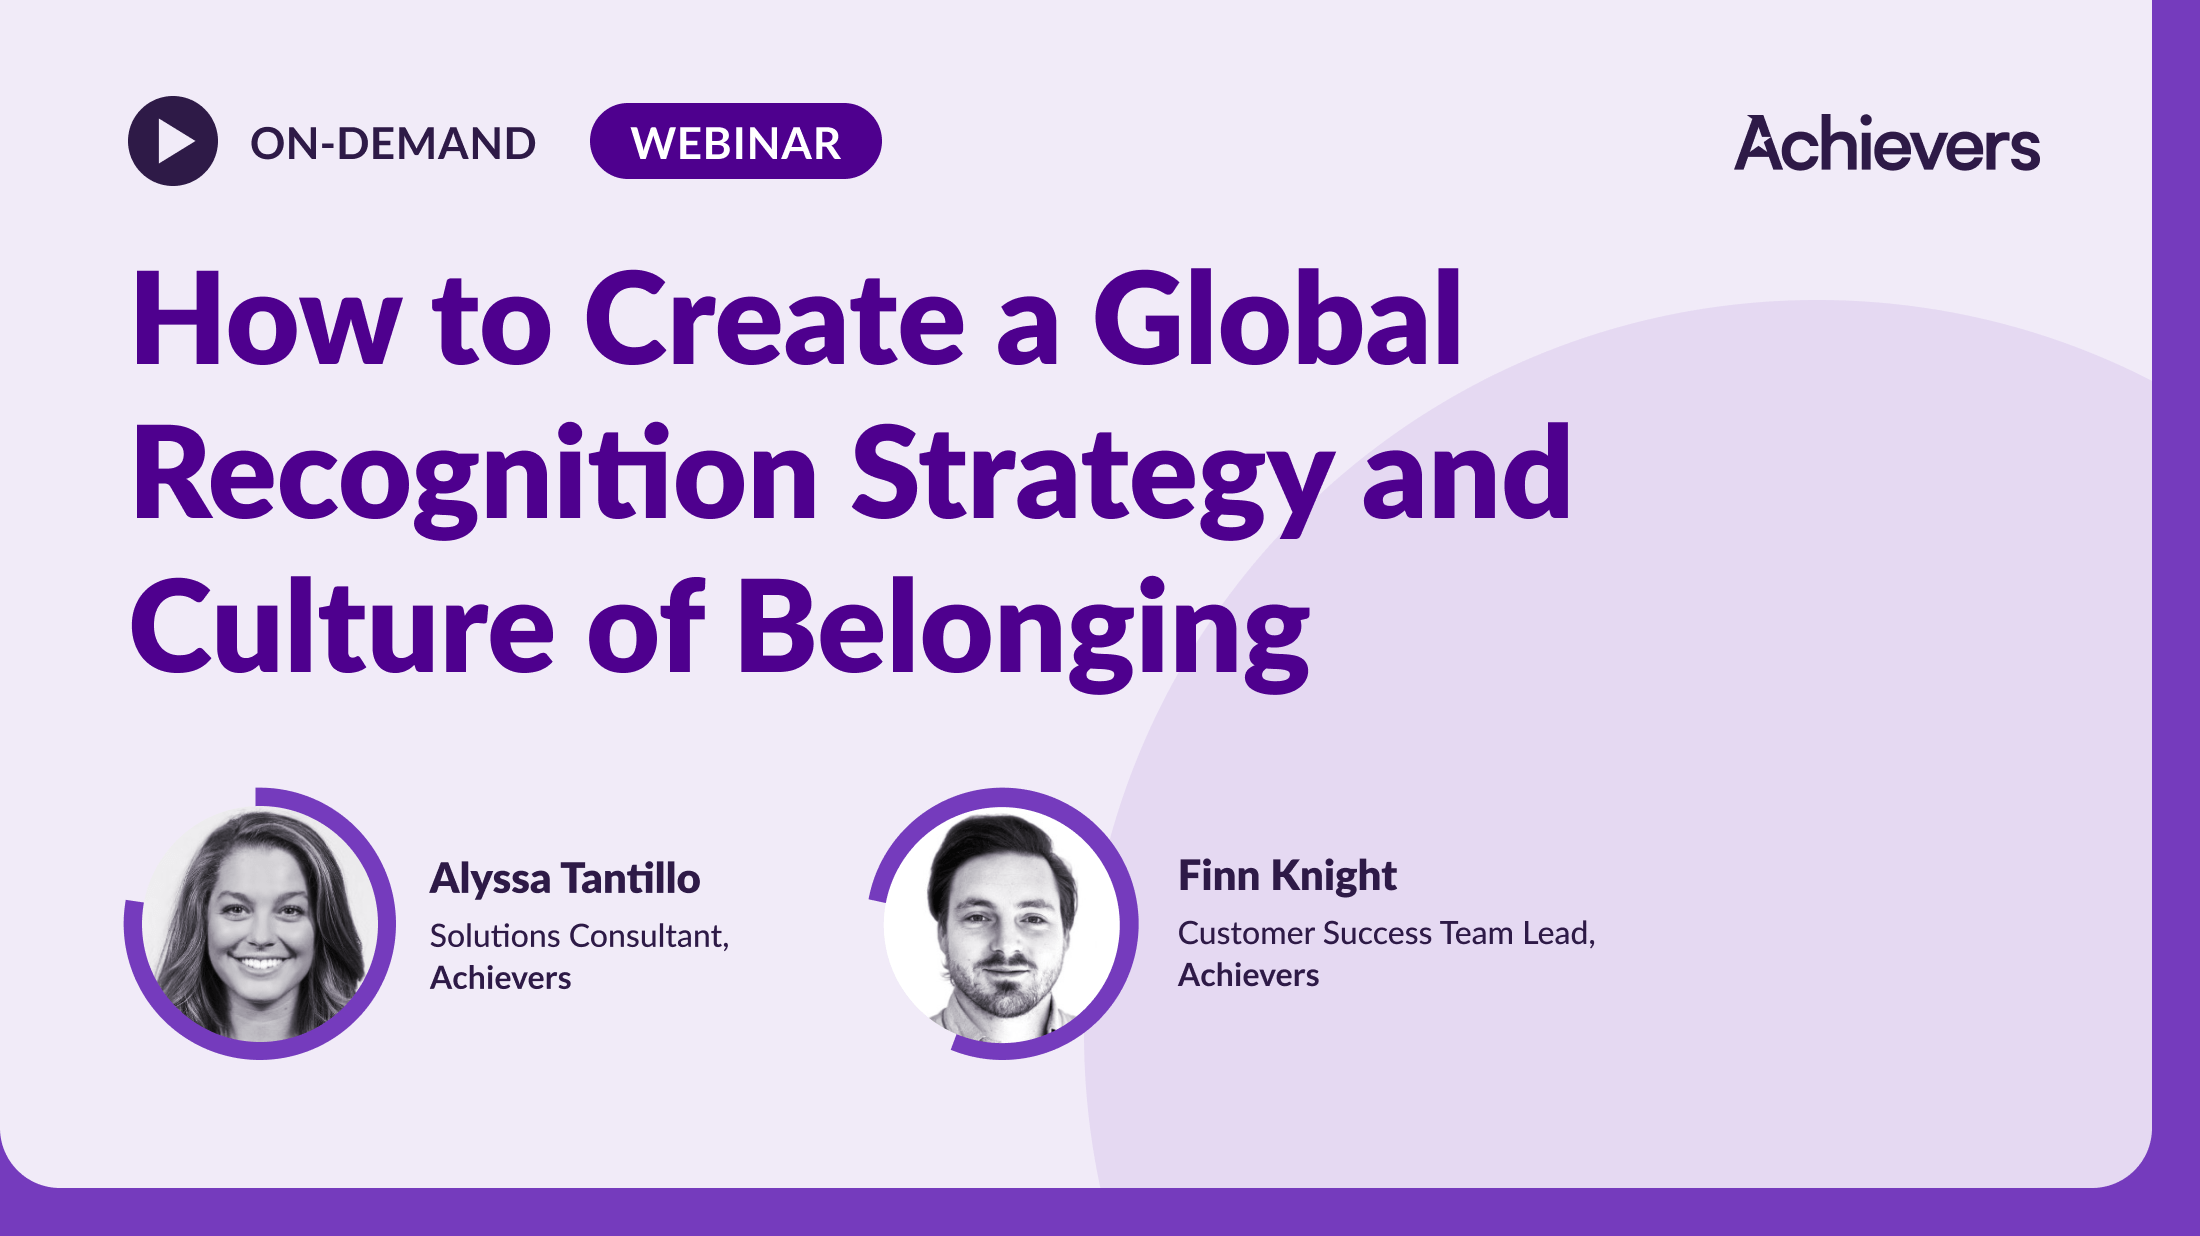 How to Create a Global Recognition Strategy and Culture of Belonging